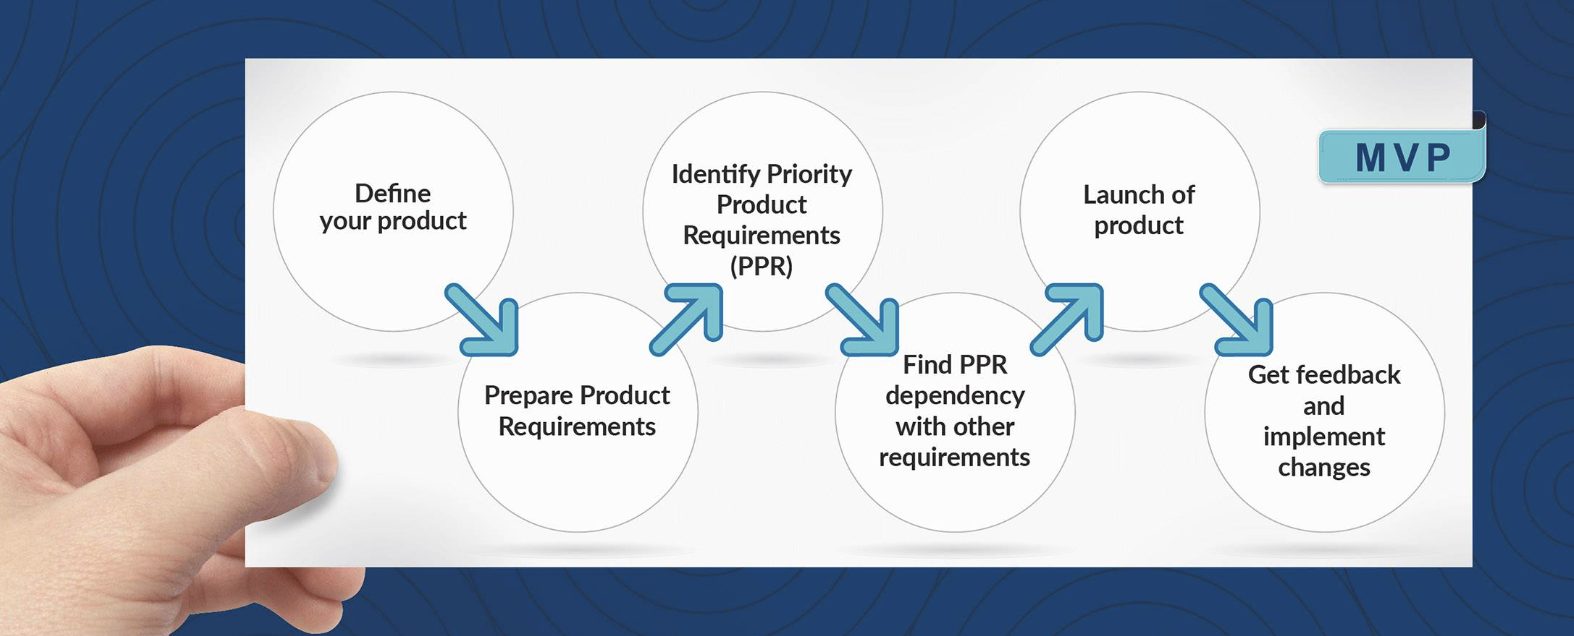 Defining Your Product Requirements